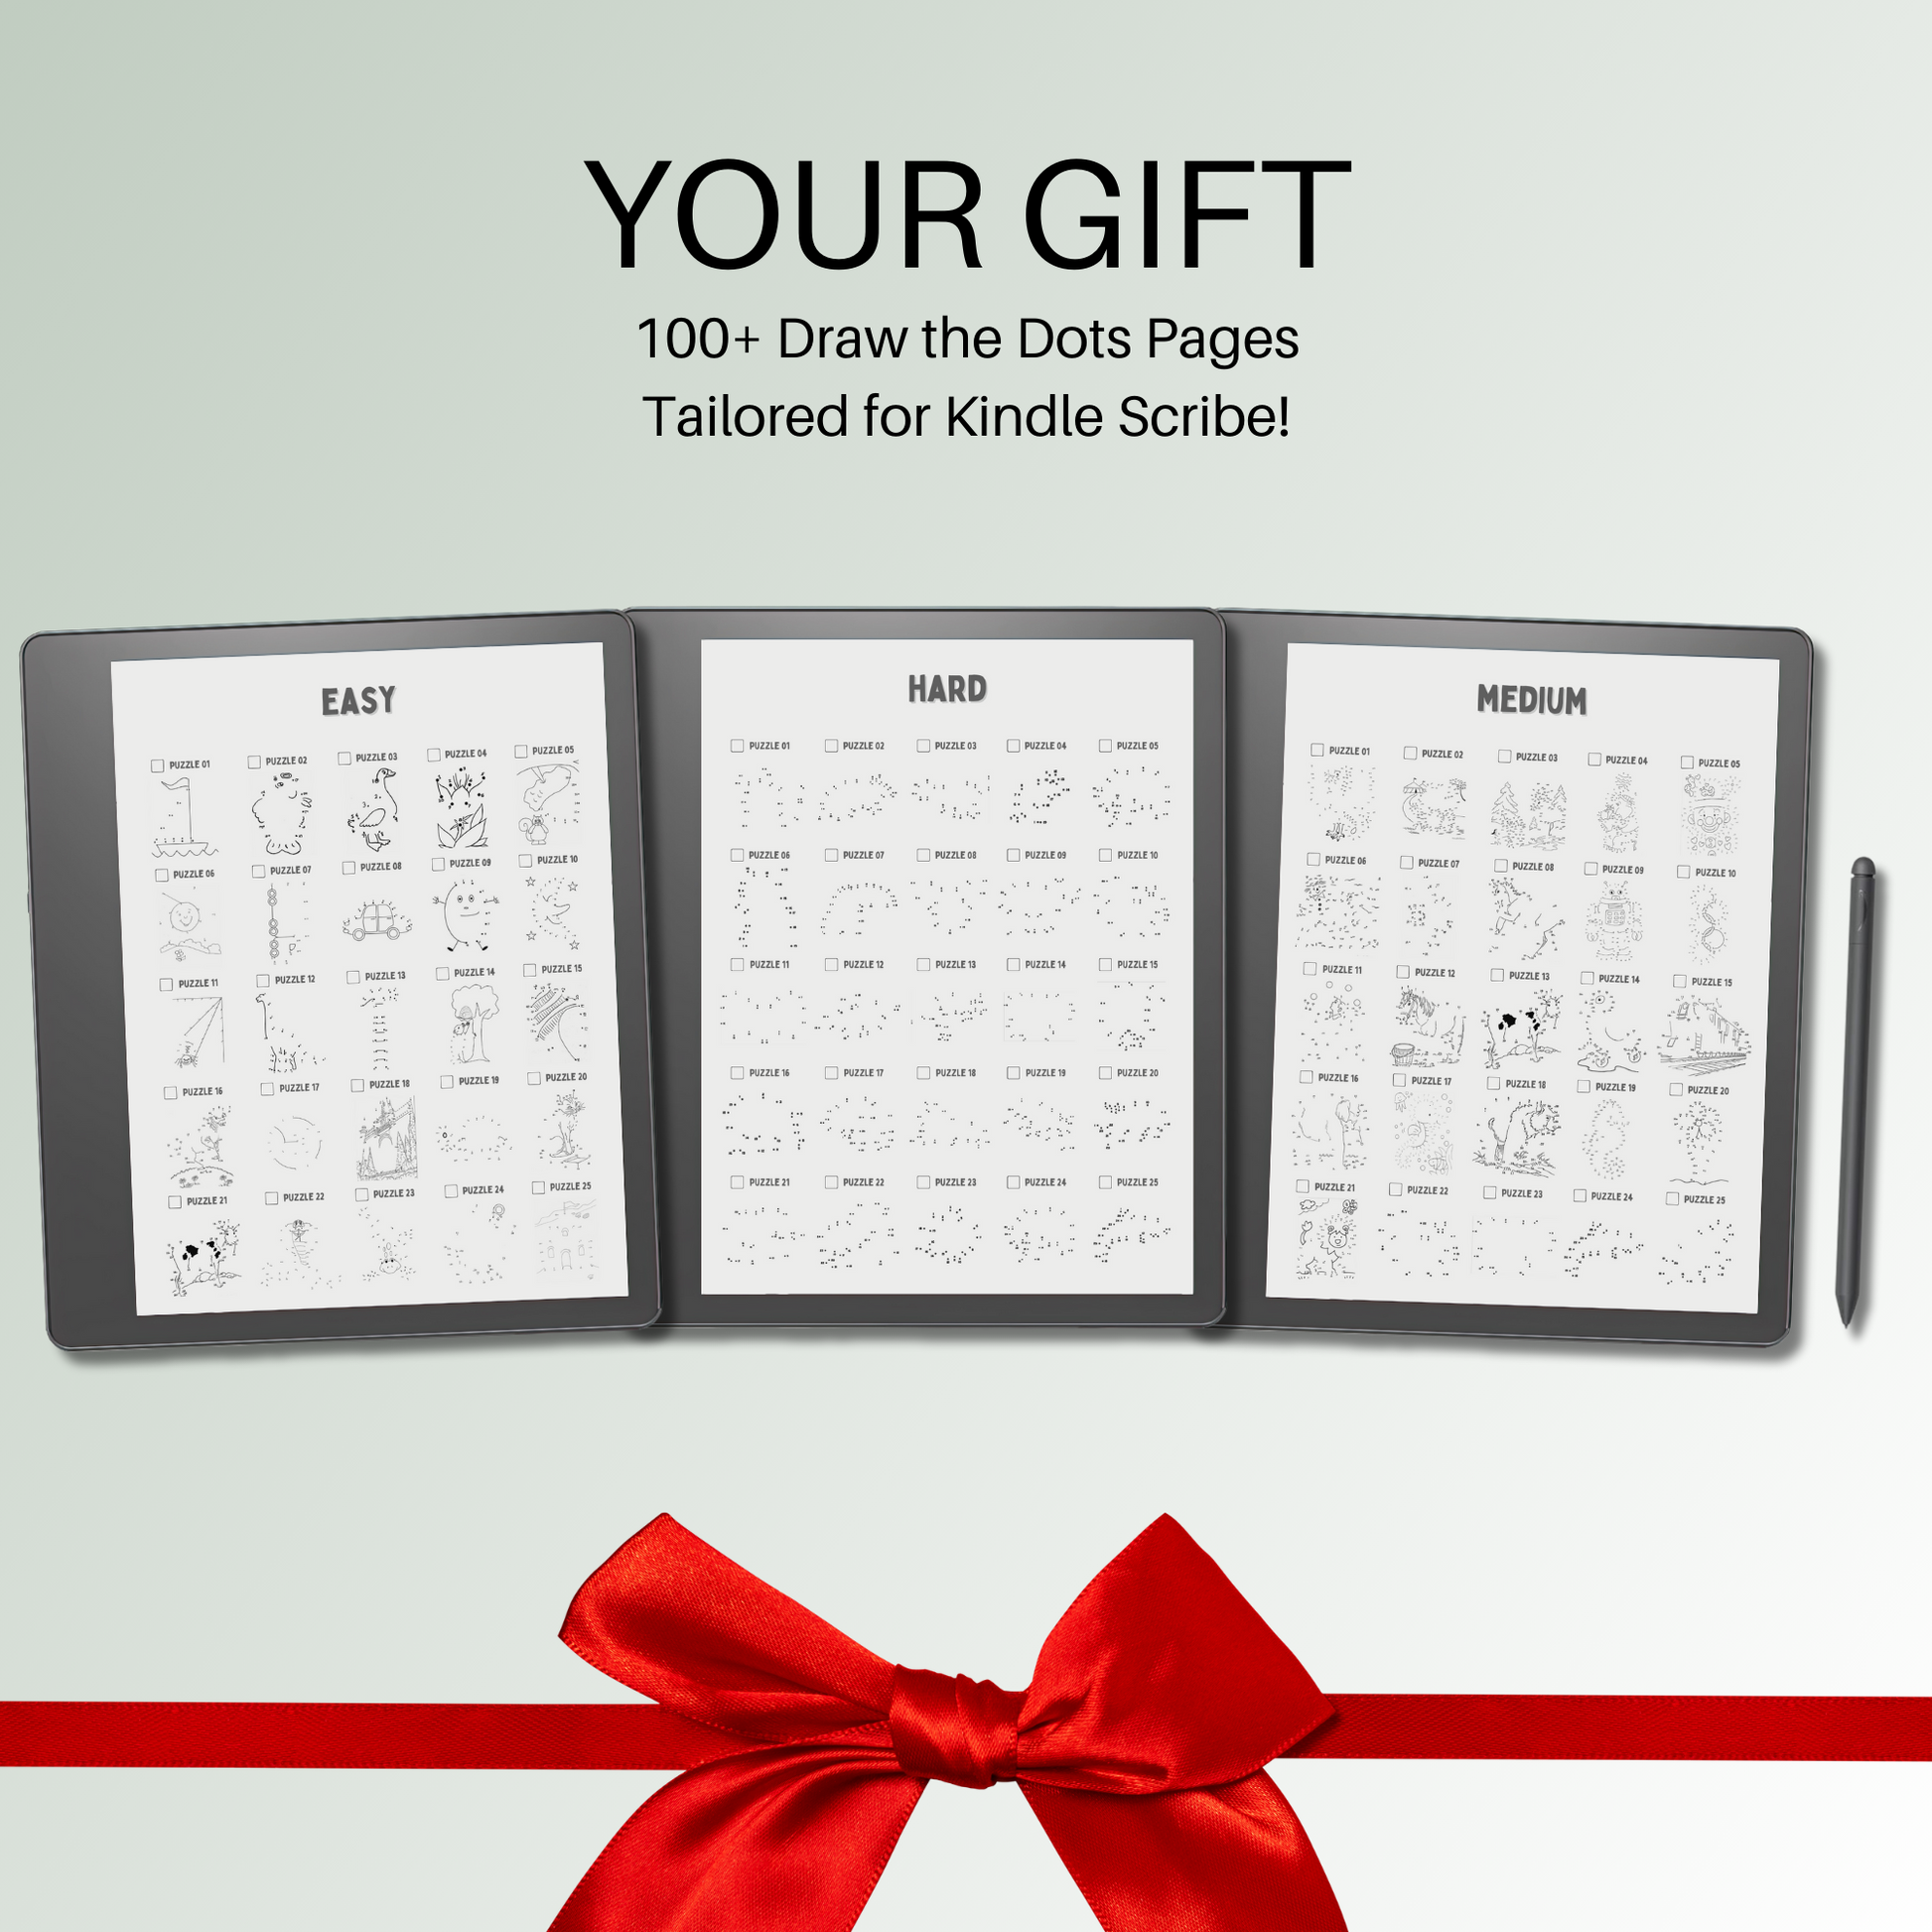 Kindle Scribe Draw the Dots puzzles as Gift.